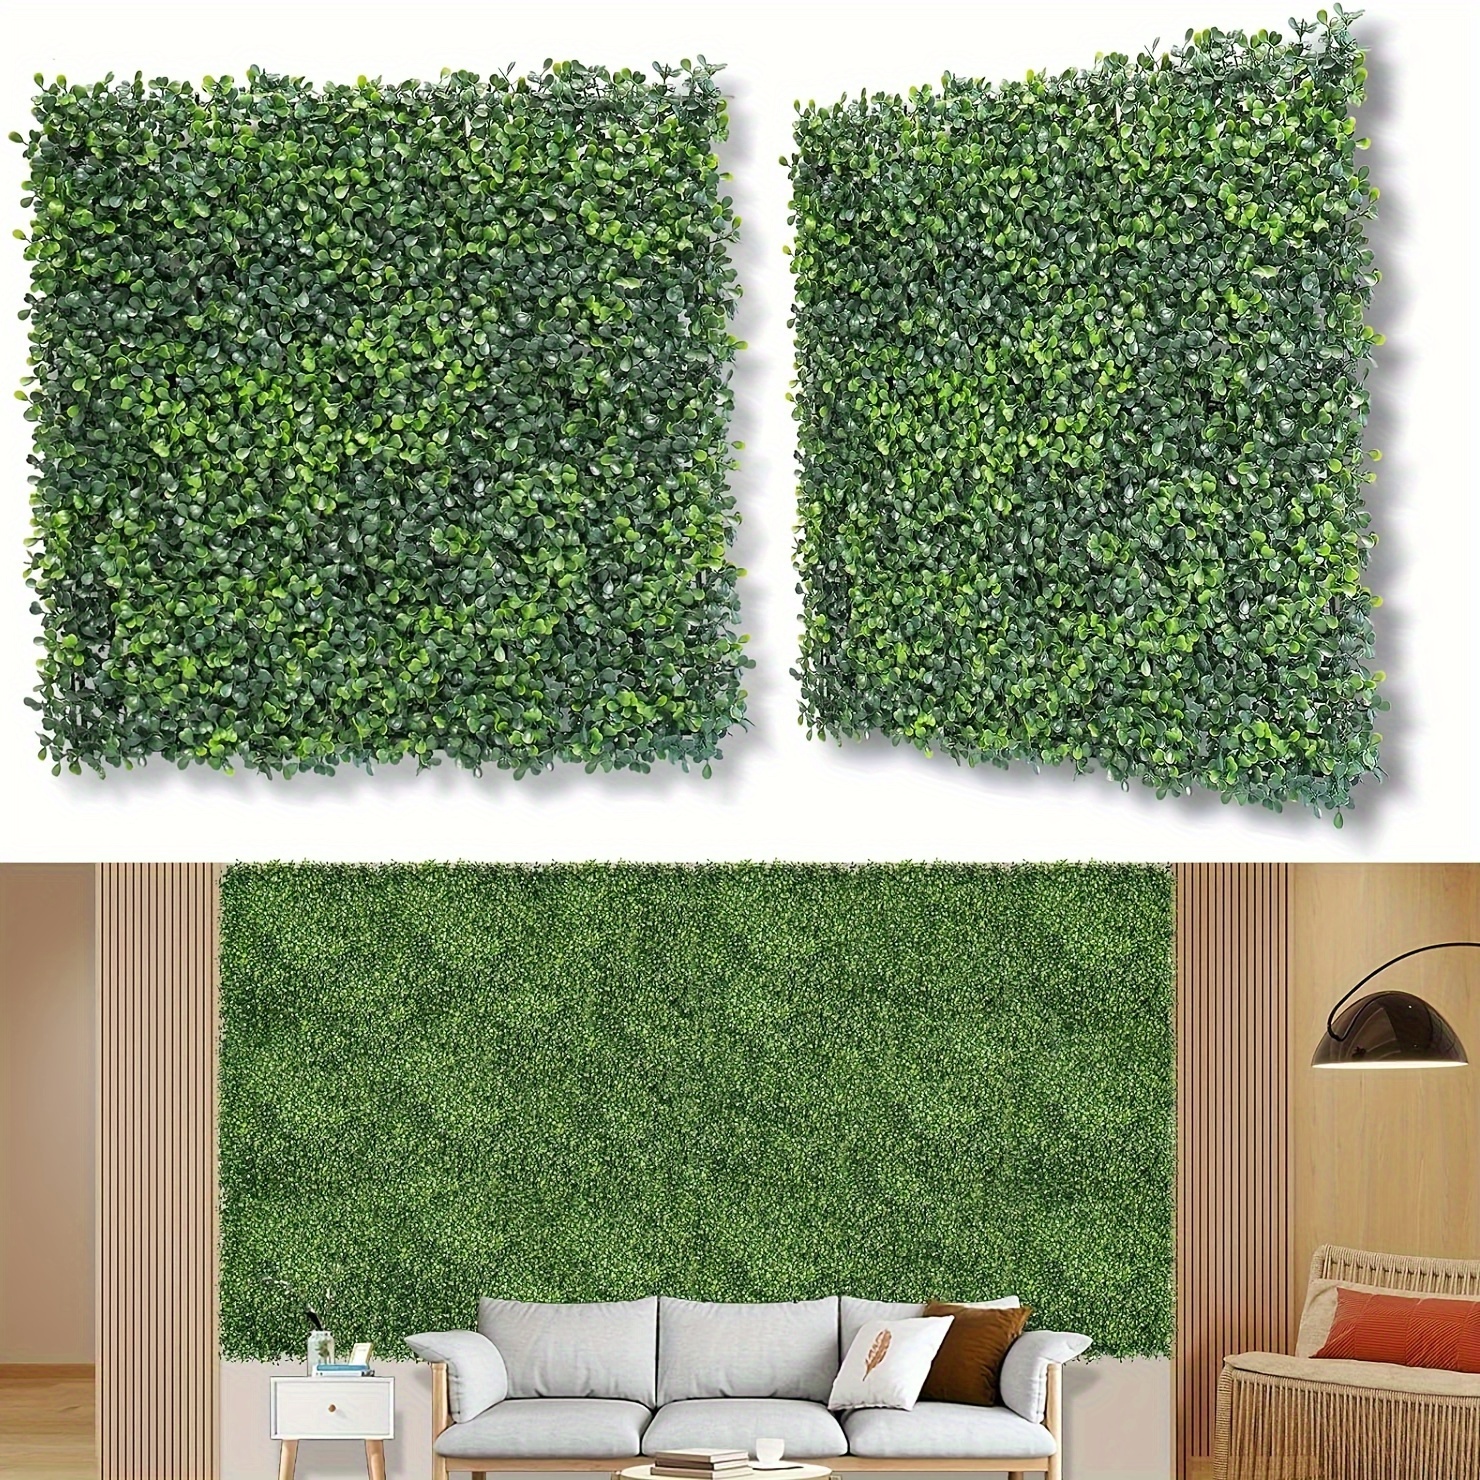 

9pcs Artificial Grass Wall Panel Backdrop, Uv-anti Greenery Boxwood Panels, For Indoor Outdoor Green Wall Decor & Ivy Fence Covering Privacy, 10 X 10 In